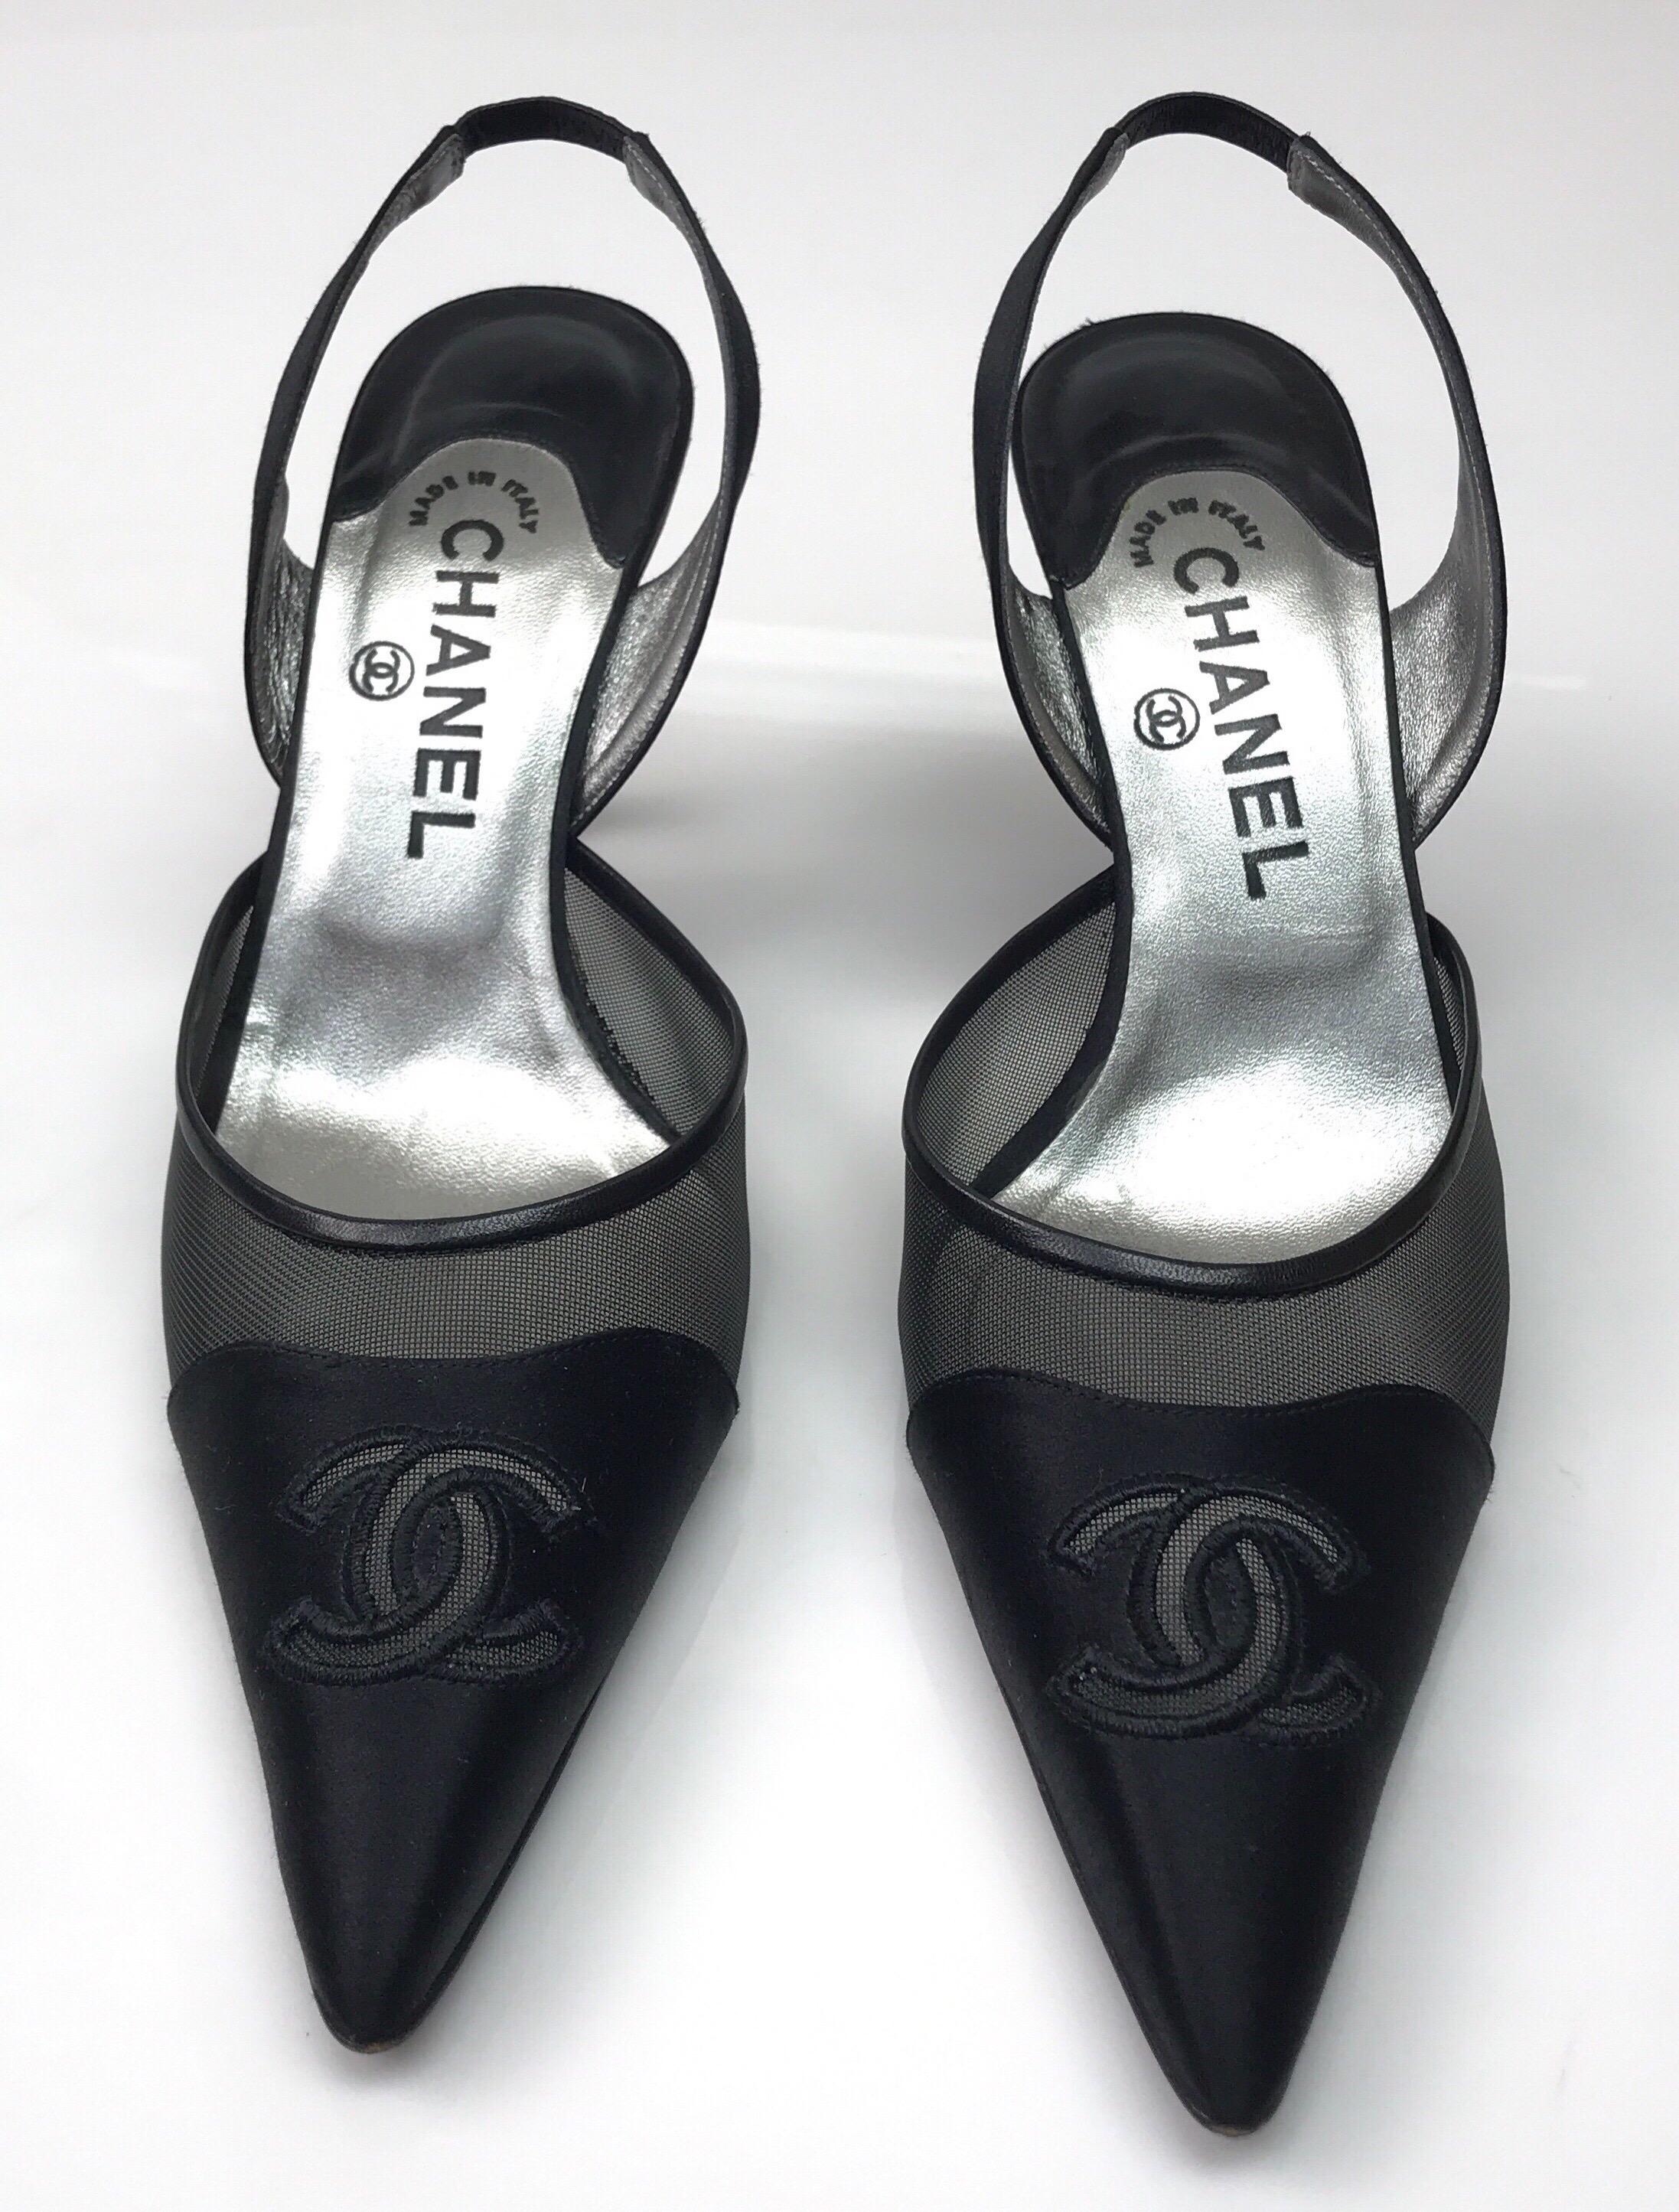 CHANEL Black Silk and Mesh Slingback w/ front CC-38.5. These beautiful Chanel heels are in excellent condition. They show barely any sign of use, with exception to the bottom of the shoe showing some wear. They are a long pointed toe and made of